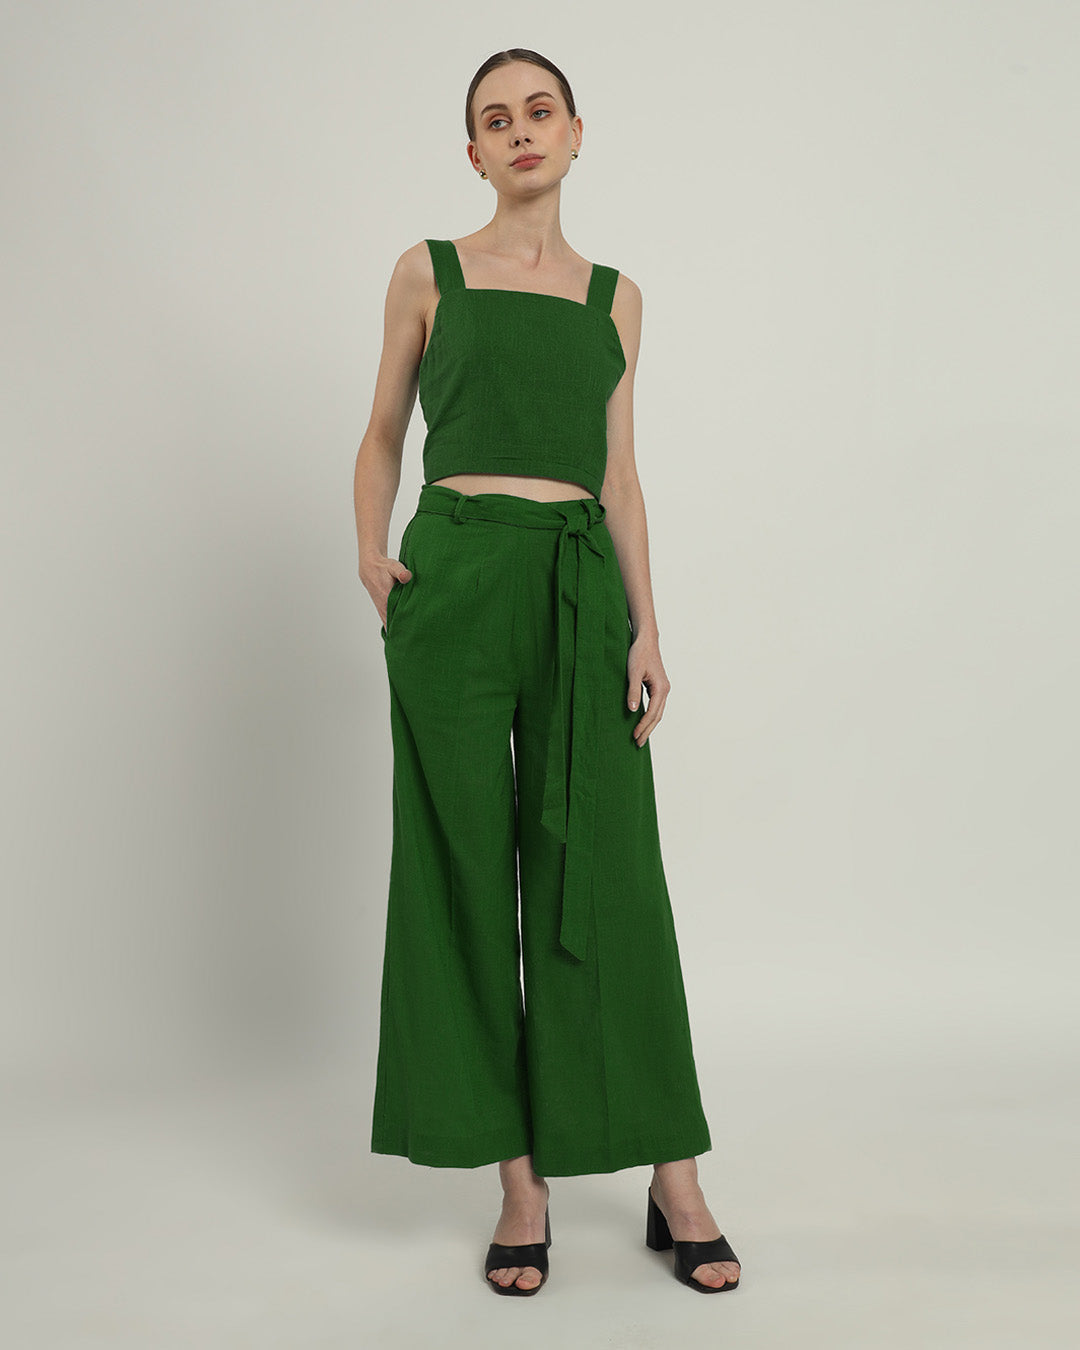 Emerald Sleek Square Crop Solid Top (Without Bottoms)